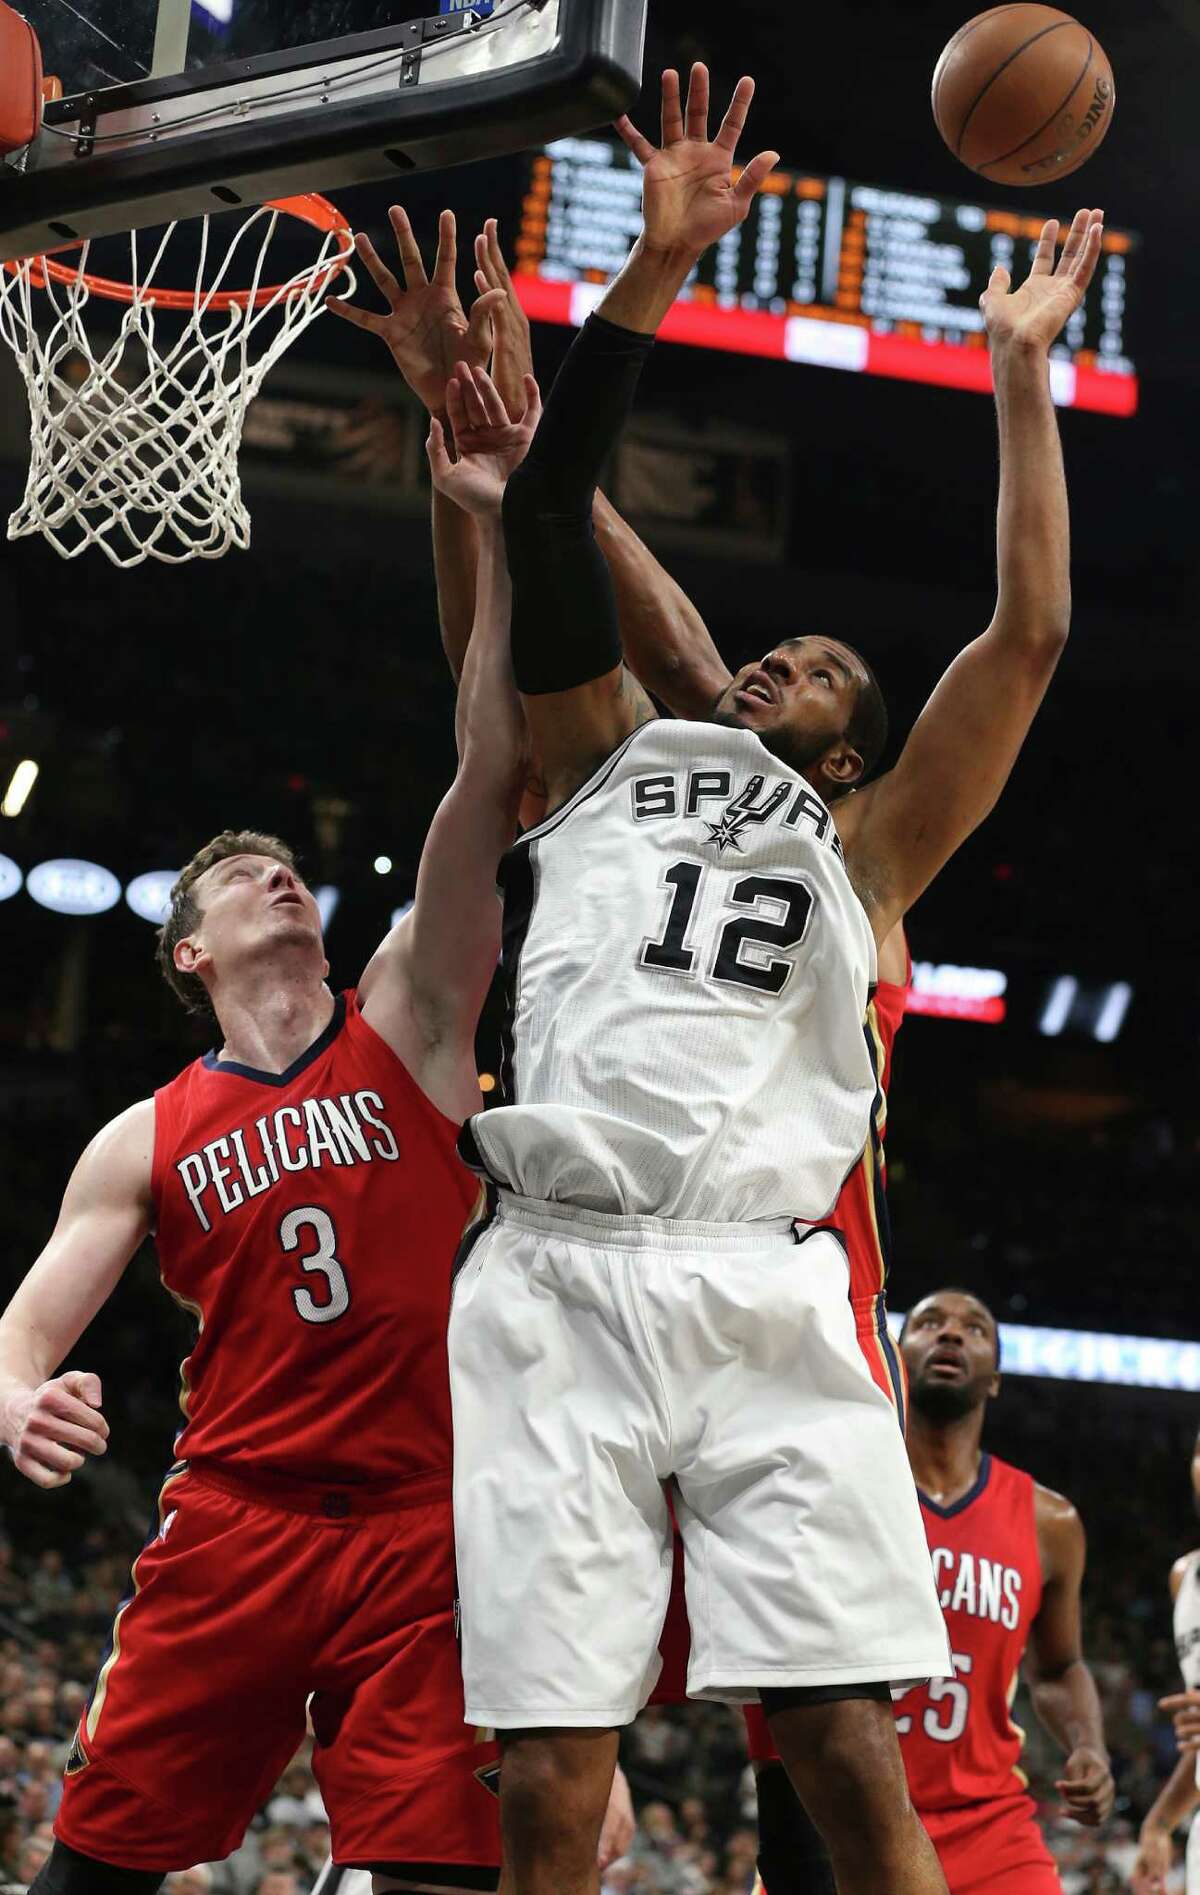 San Antonio Spurs' LaMarcus Aldridge battles for a rebound against New Orleans Pelicans' Omer Asik during the first half at the AT&T Center, Wednesday, March 30, 2016.